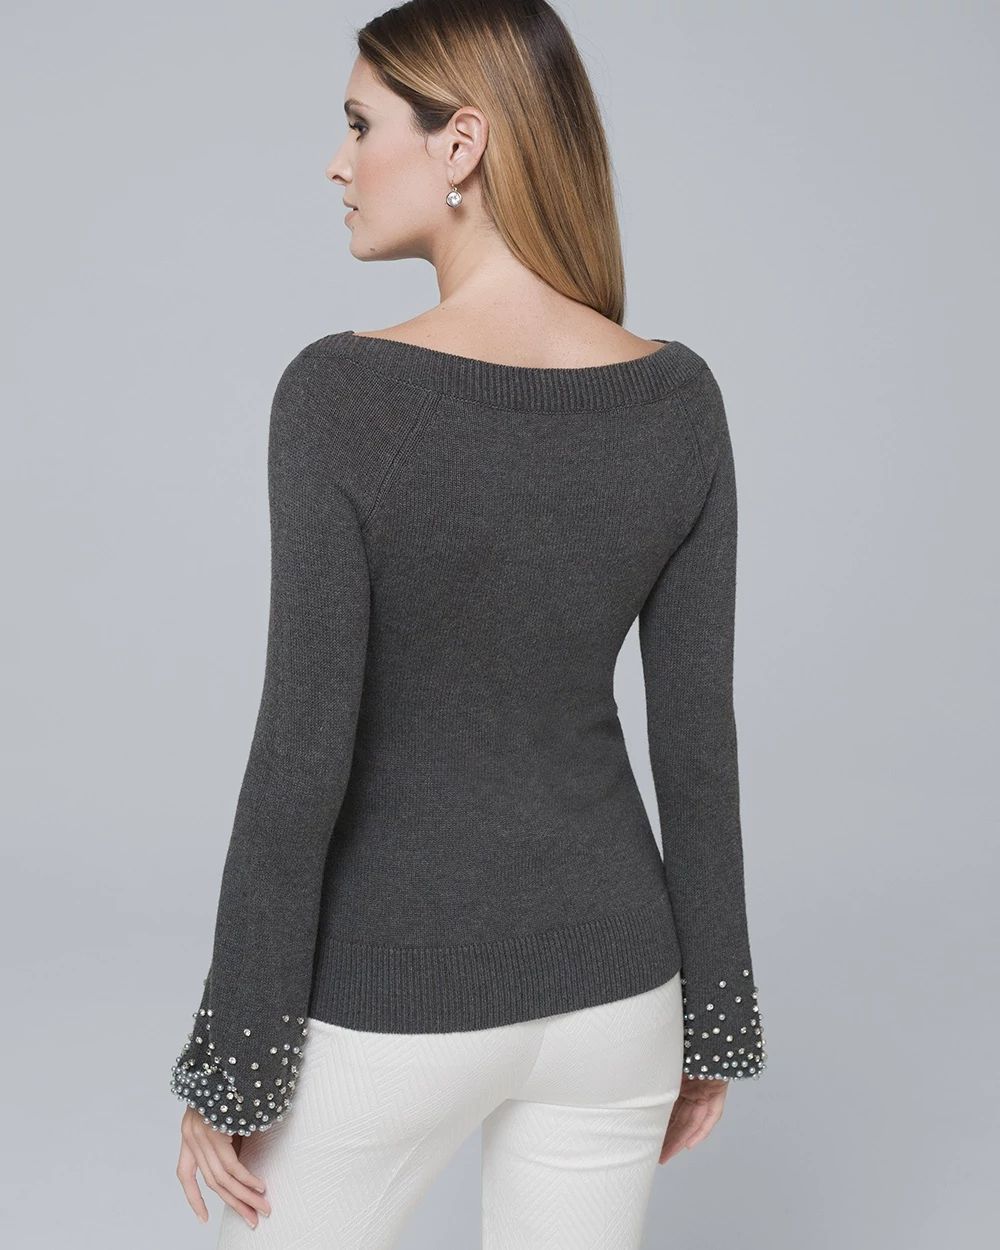 Embellished-Cuff Sweater click to view larger image.